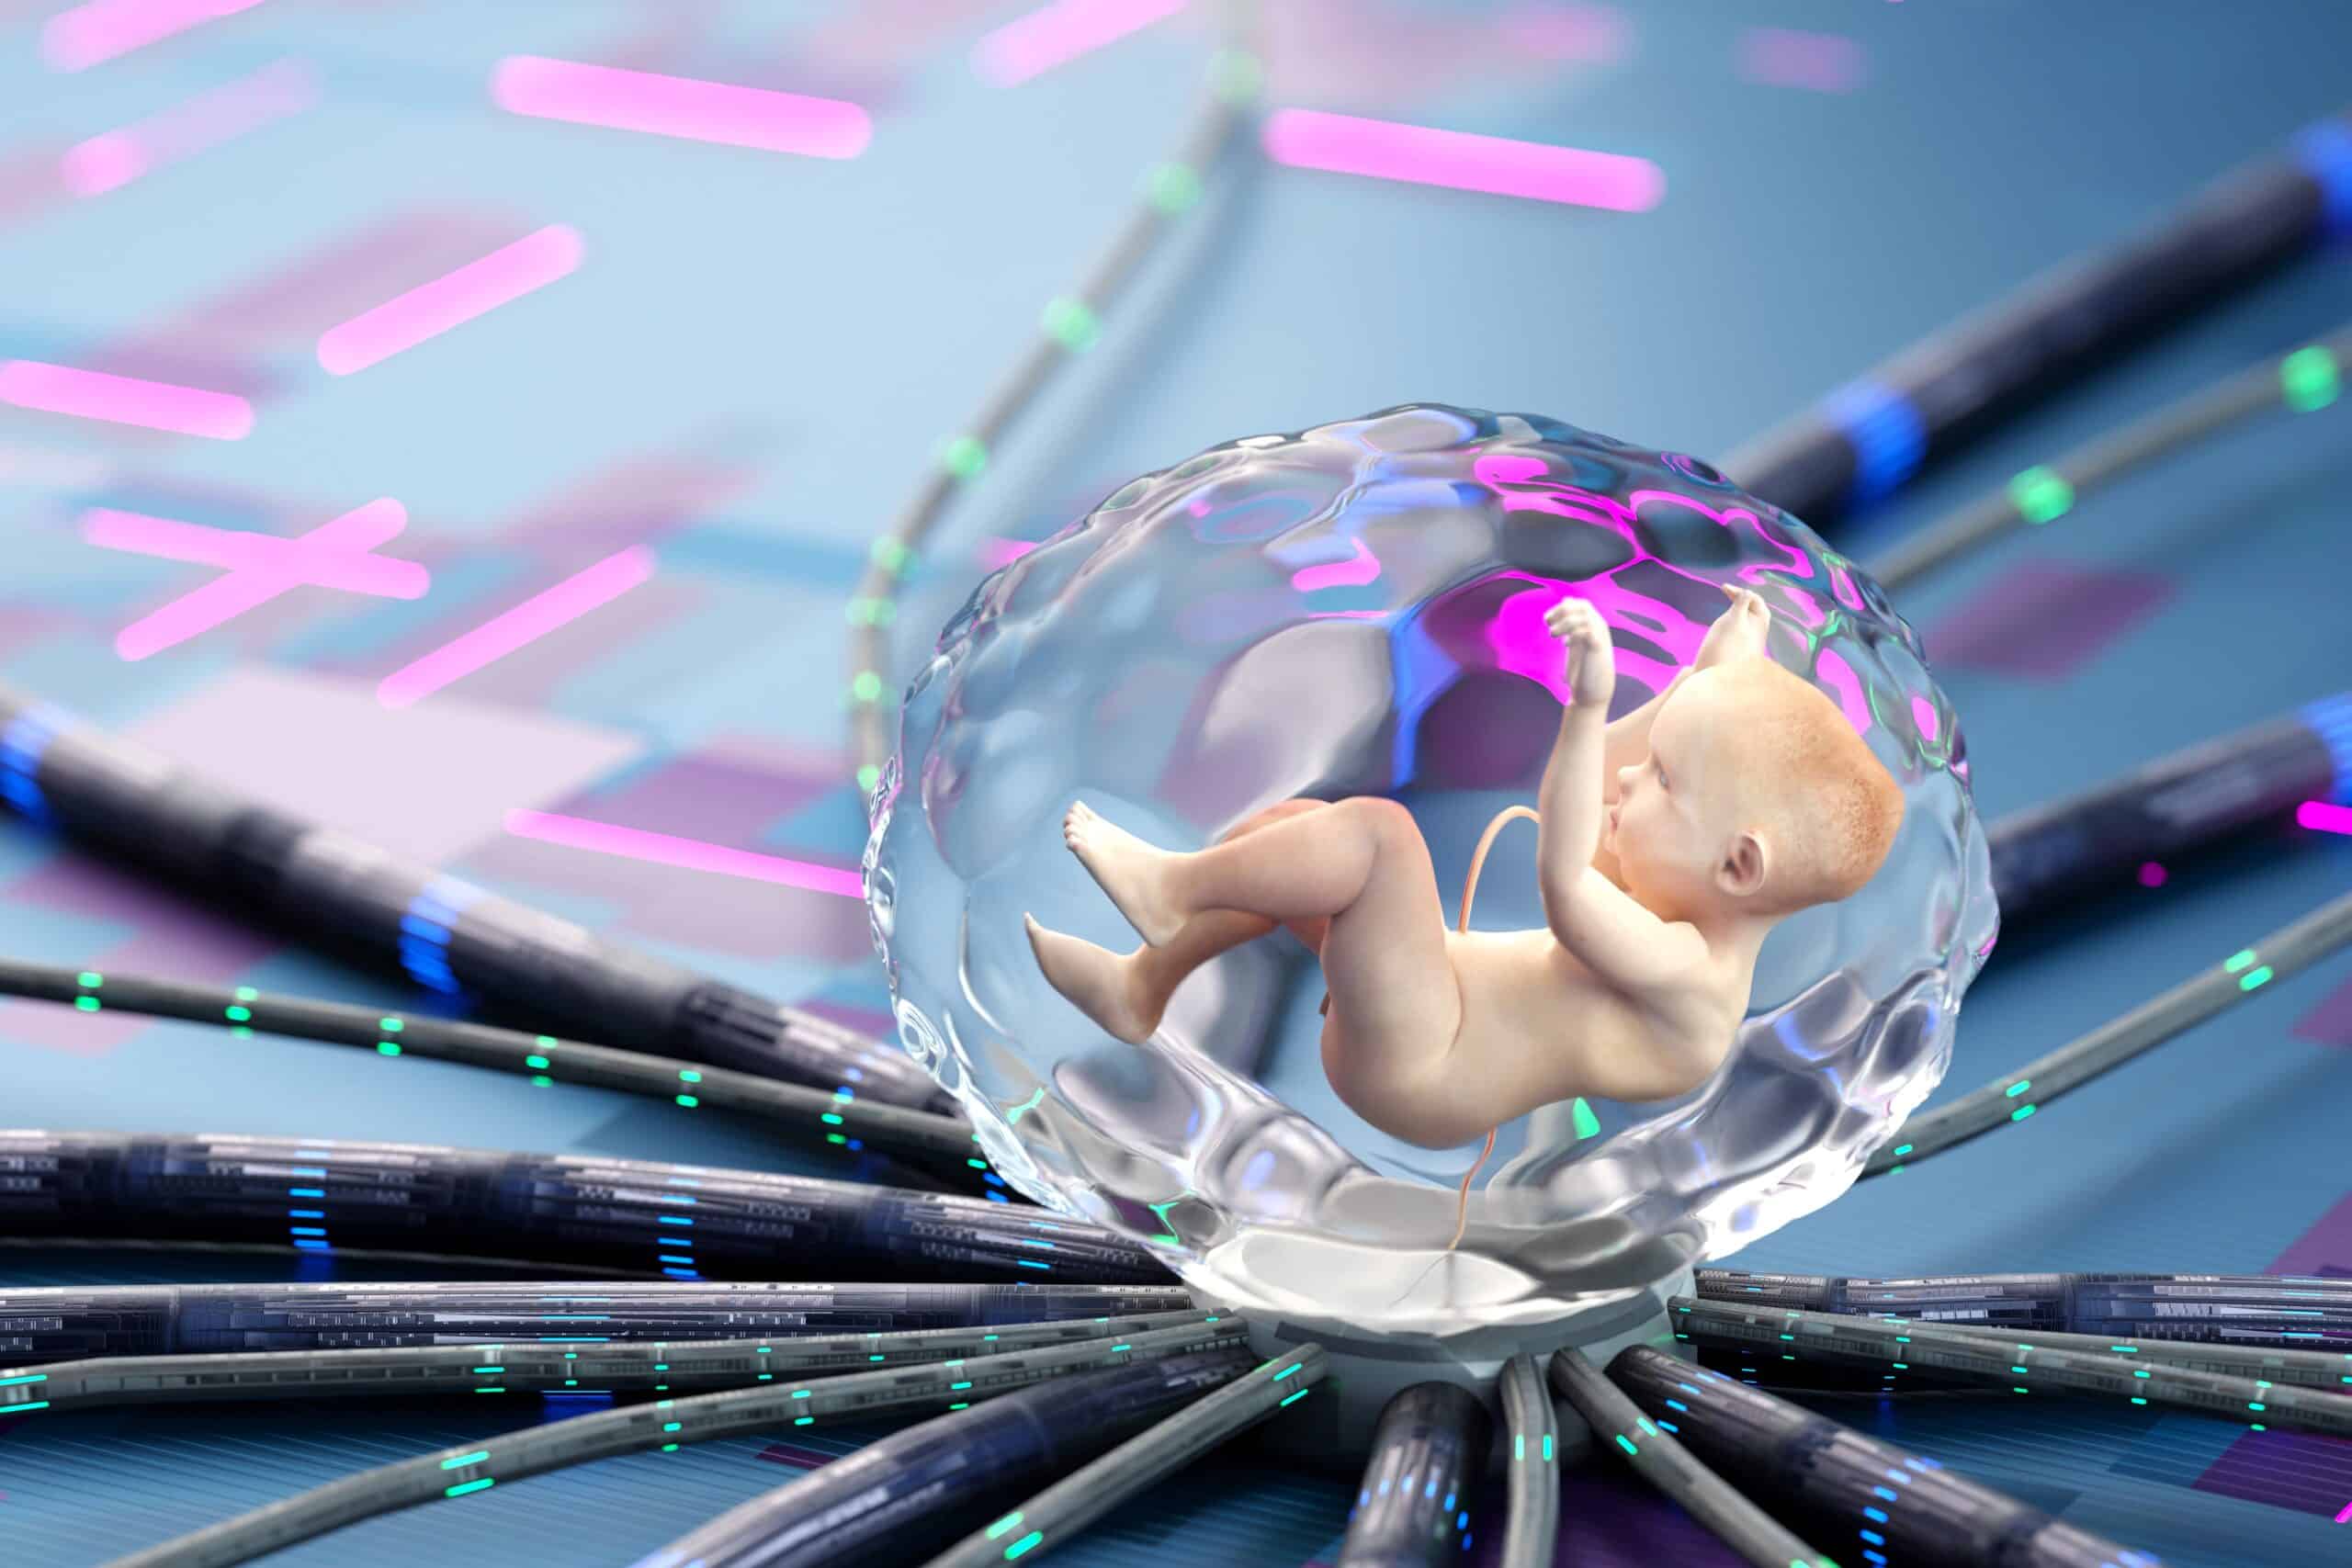 From pod babies to AI-fertility tools: this is the eerie future of human reproduction